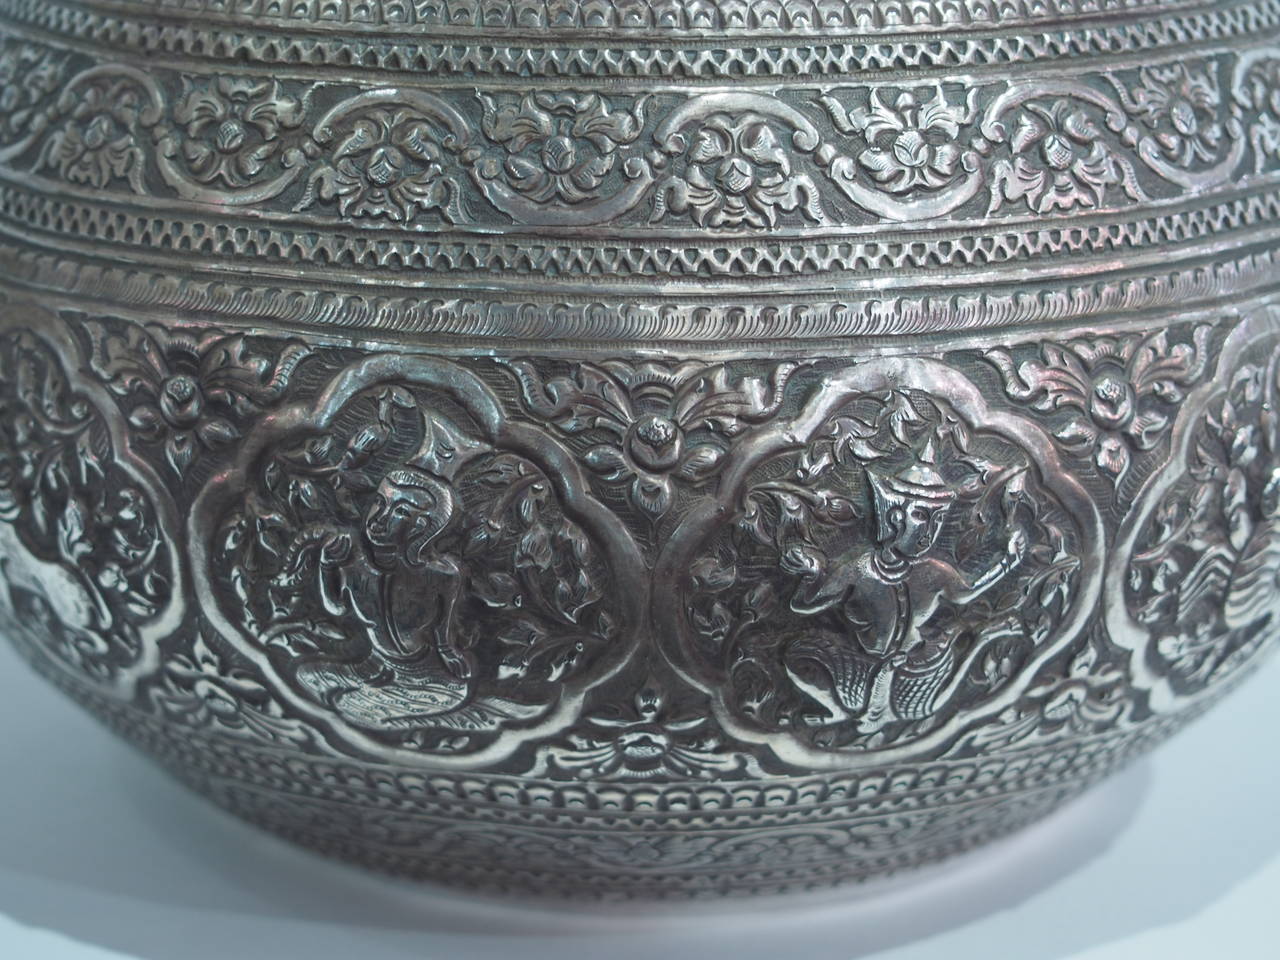 The Burmese silver bowl was traditionally used for ceremonial or offering purposes but not confined to religious use.  It is finely engraved with embossed signs of the Zodiac, enclosed by close-knit foliage chased in low relief, and hand made in